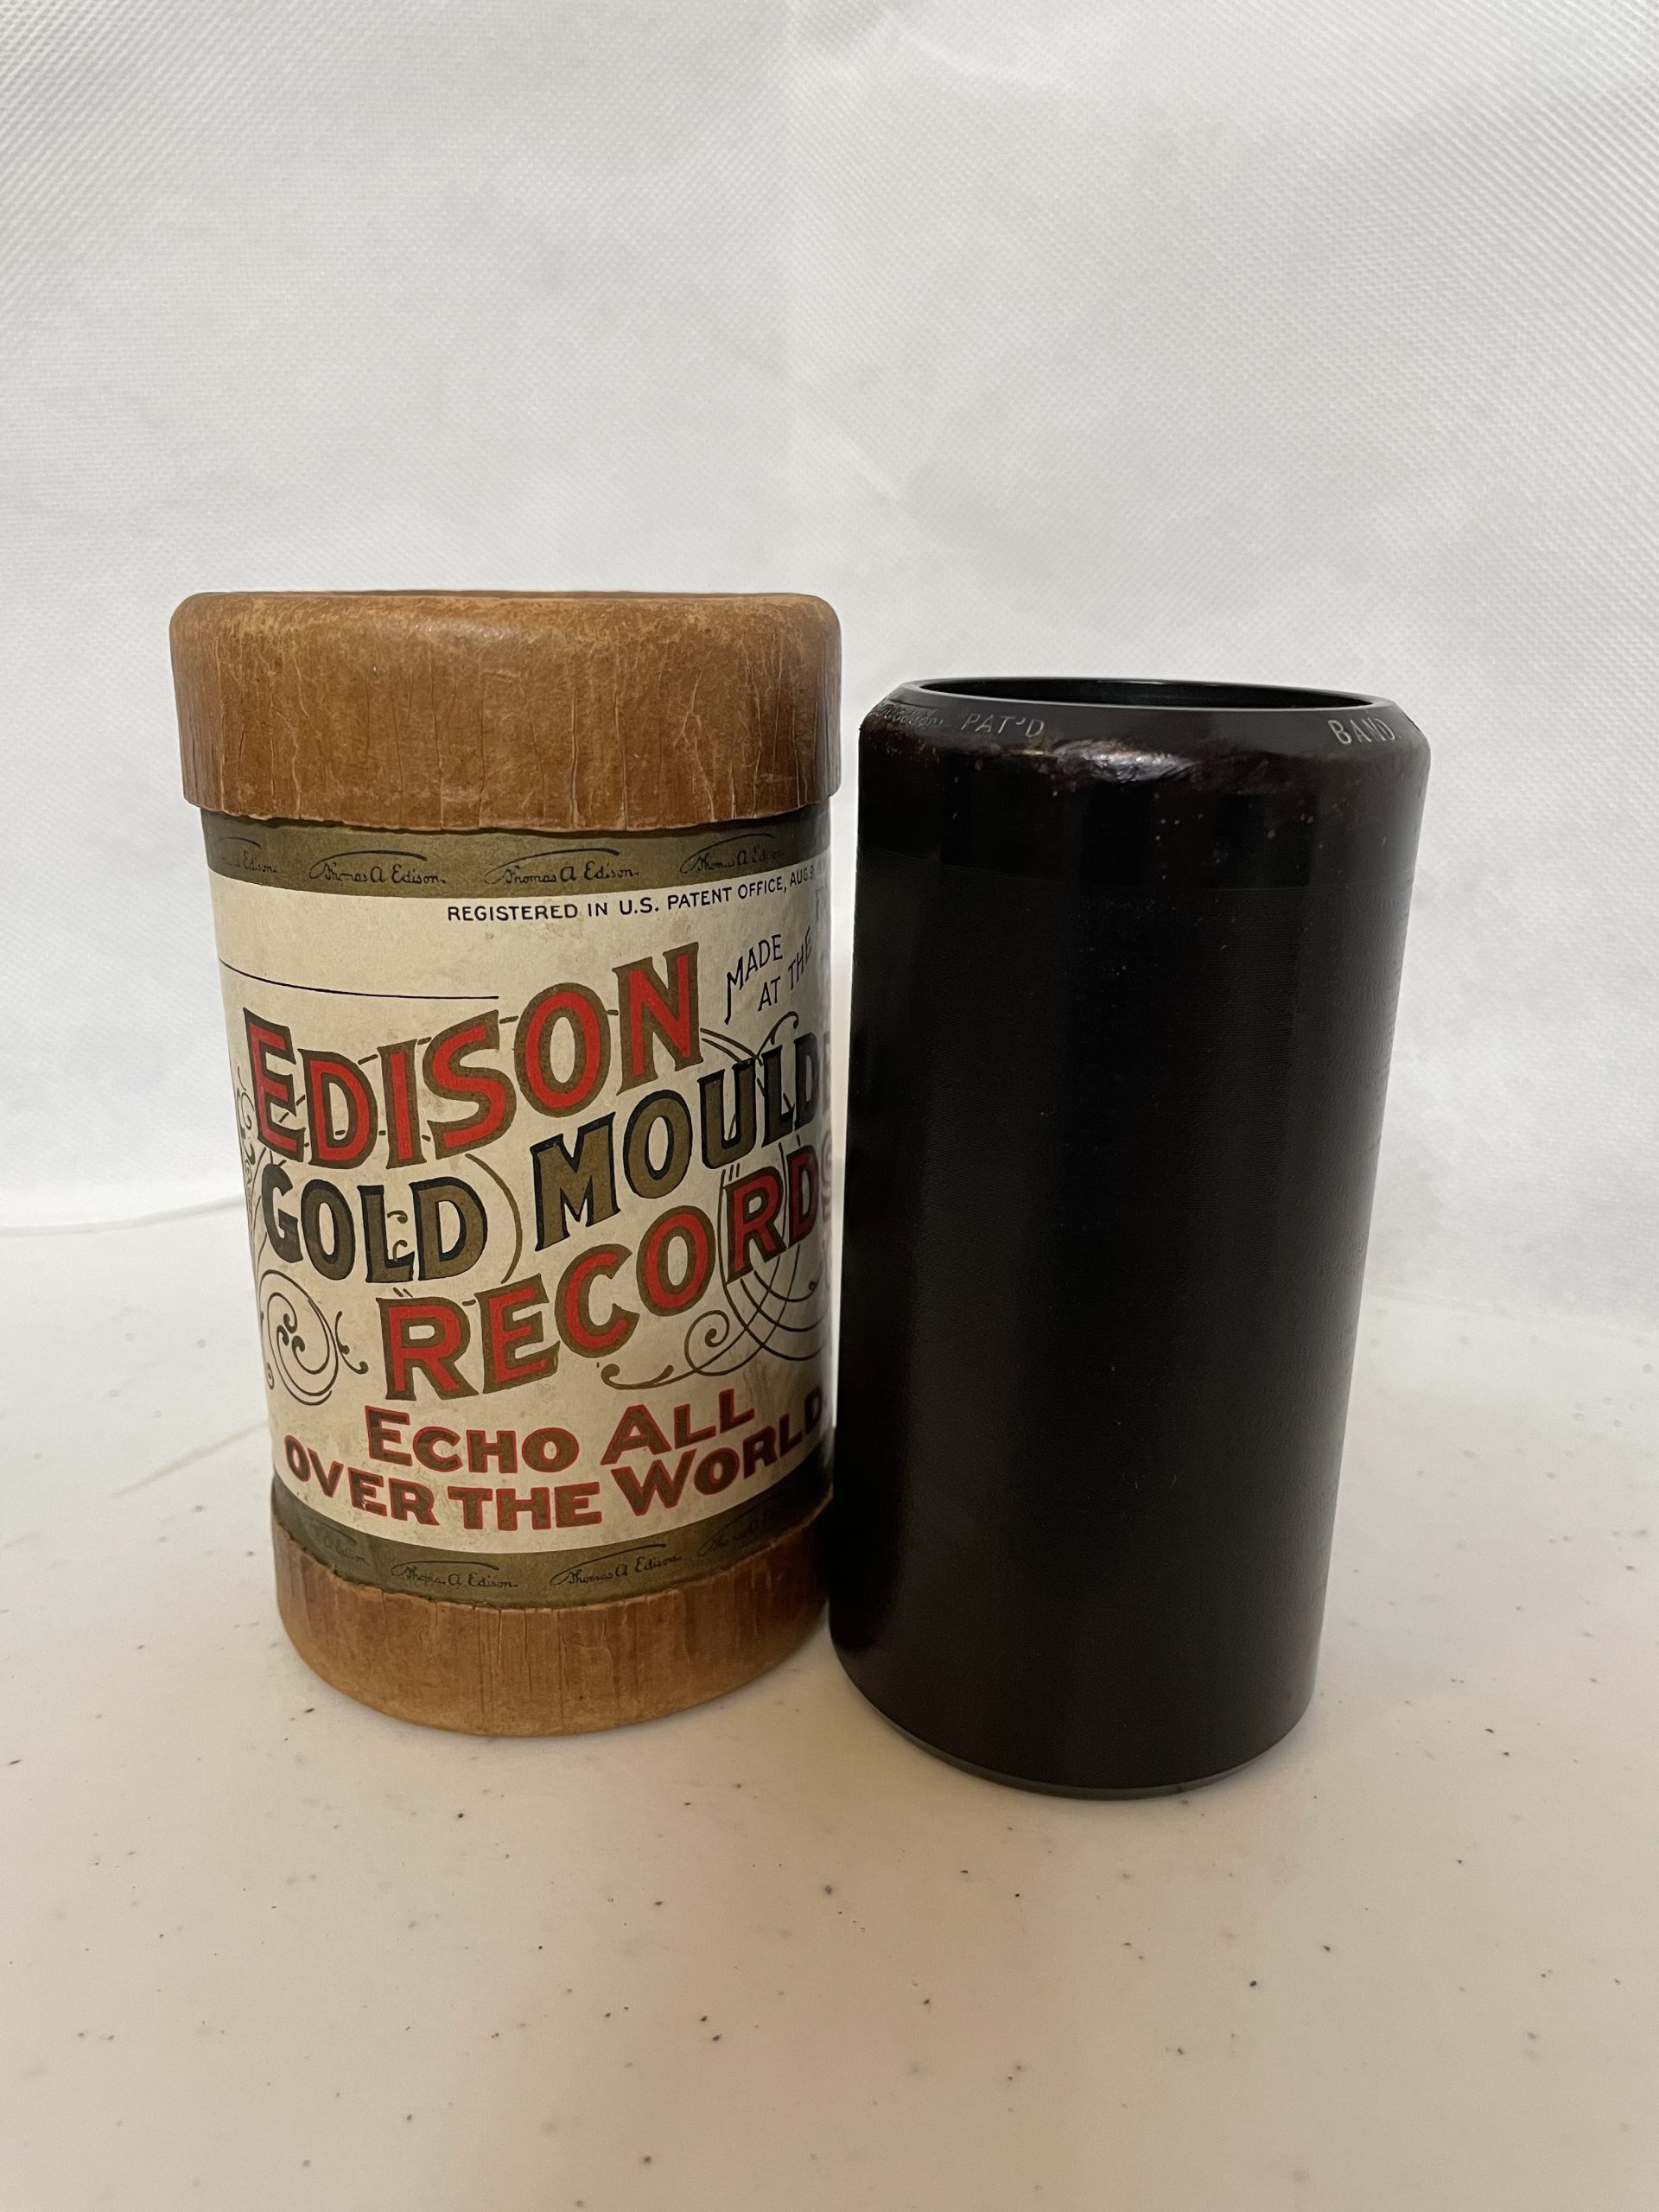 Edison 2 minute cylinder…”Only a Message from Home Sweet Home”